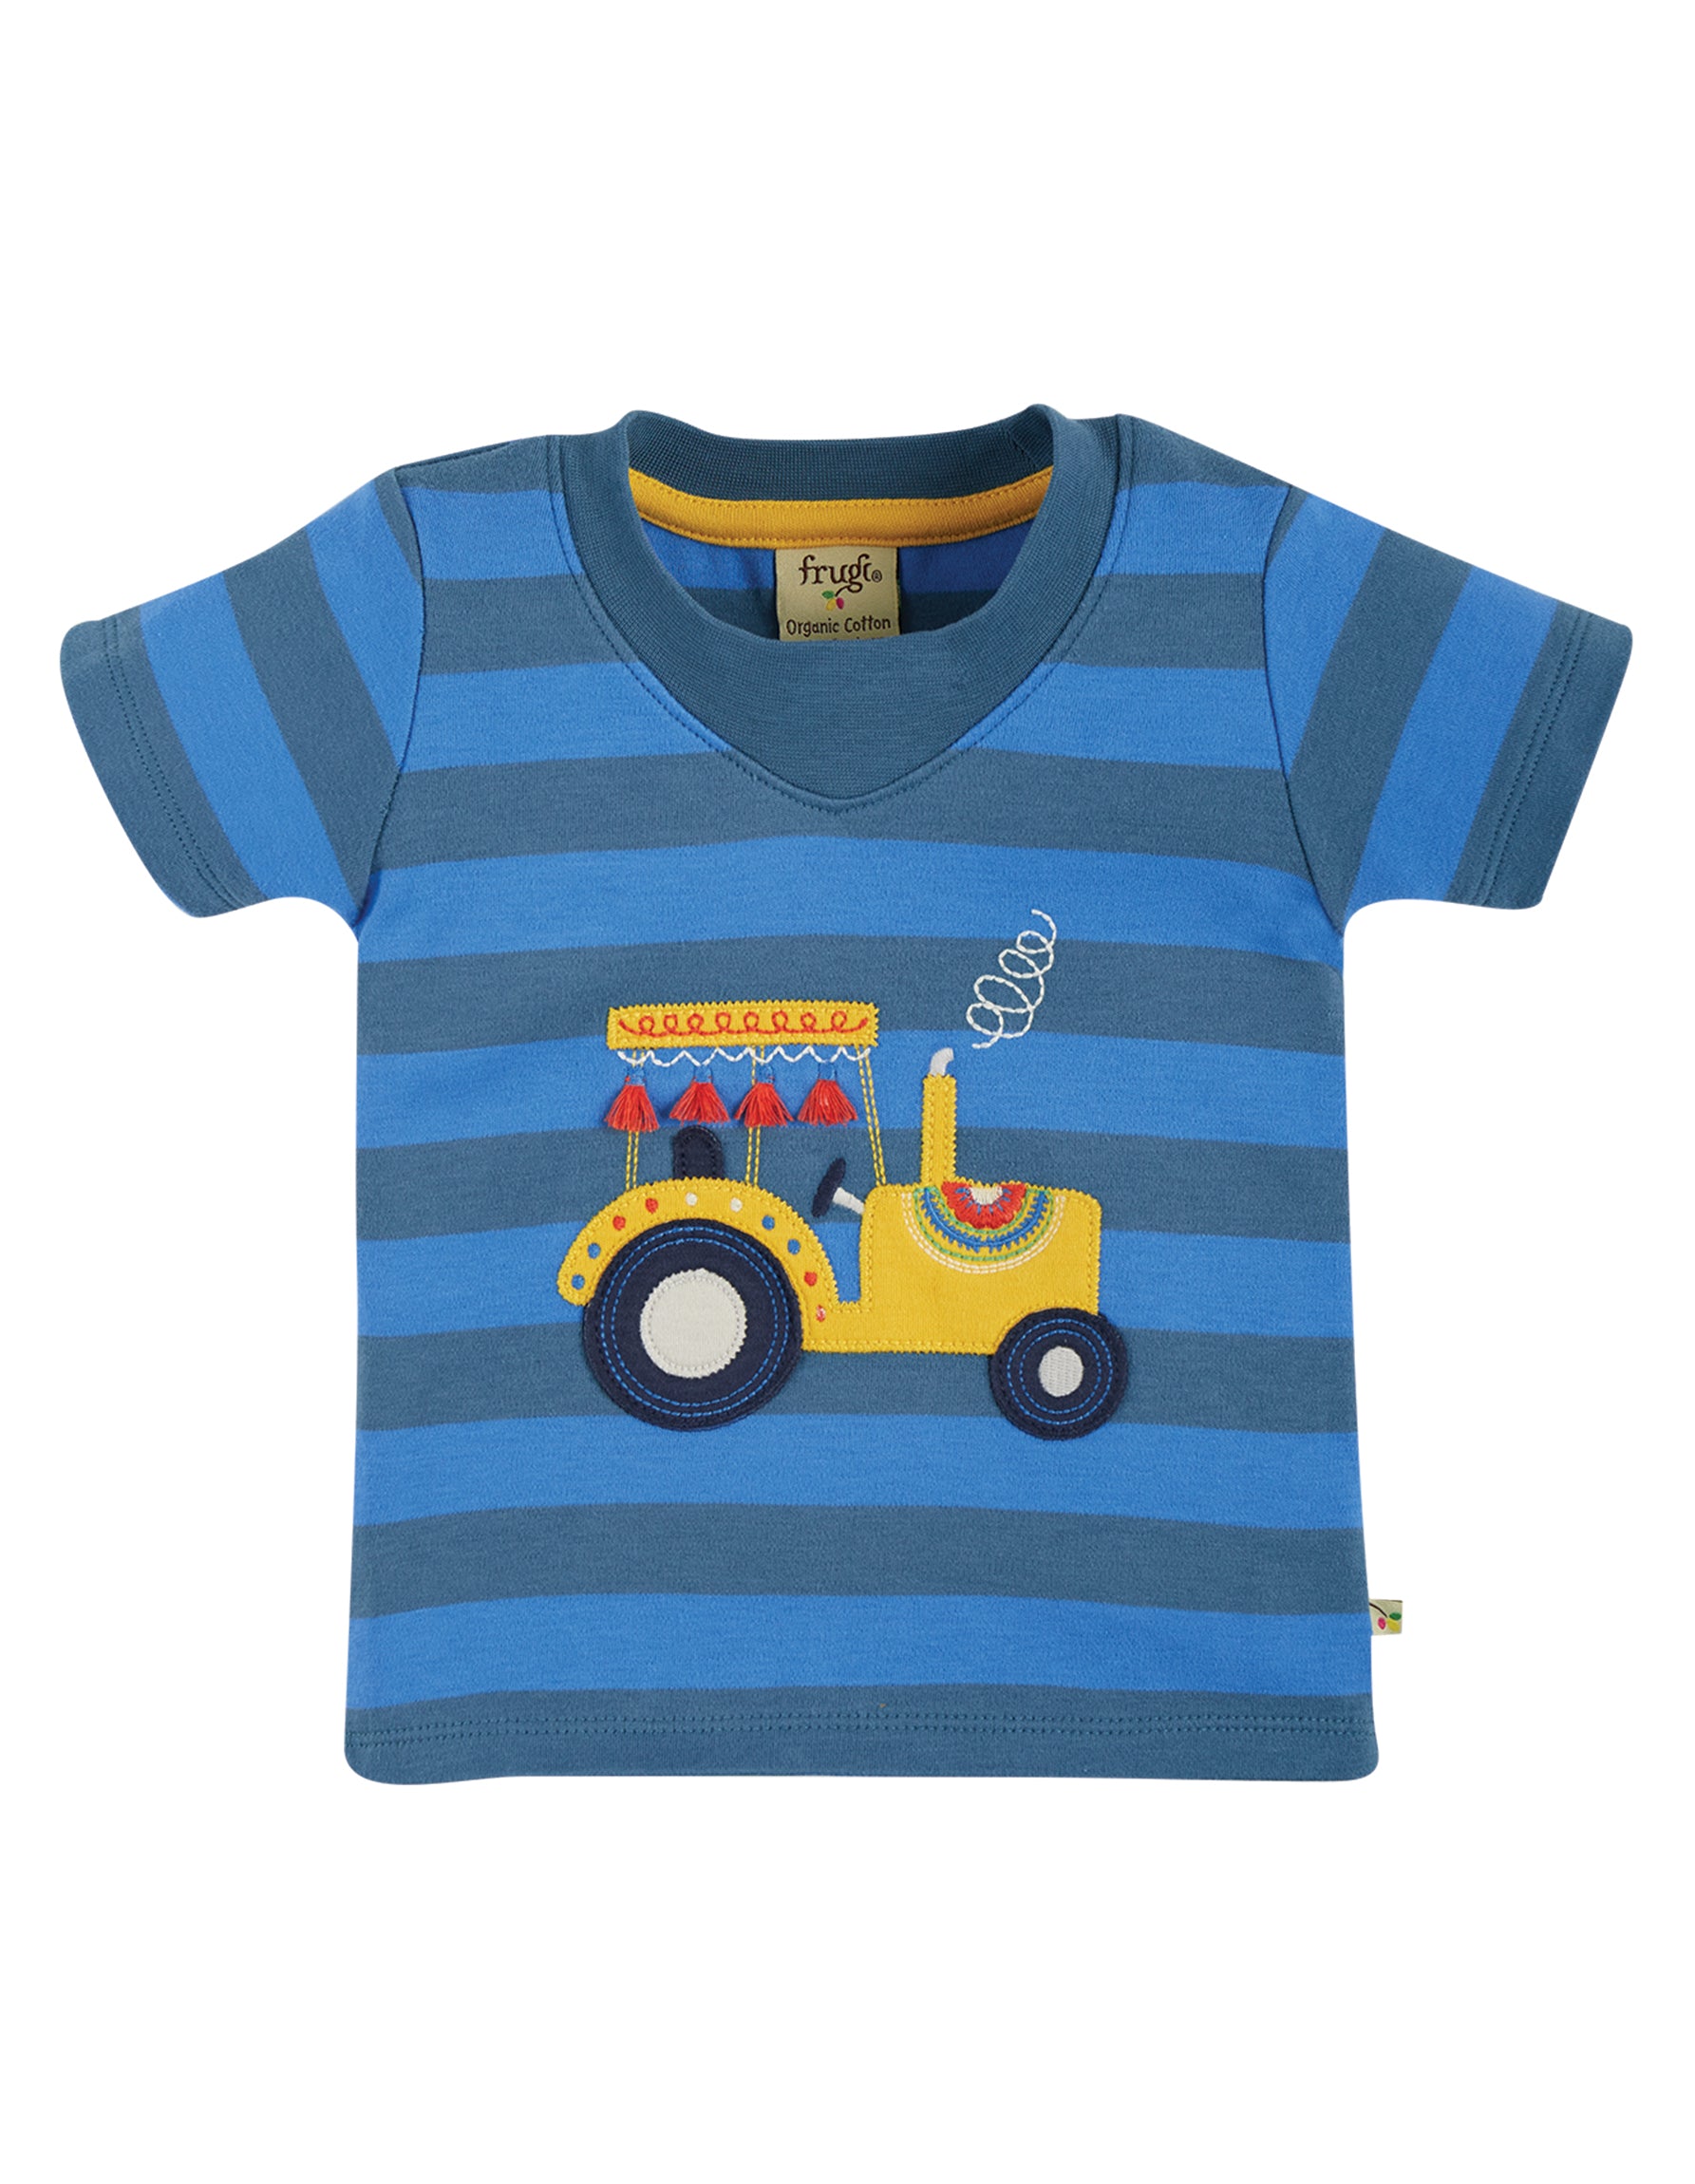 Frugi, Easy On Tee, Blue Stripe/Tractor